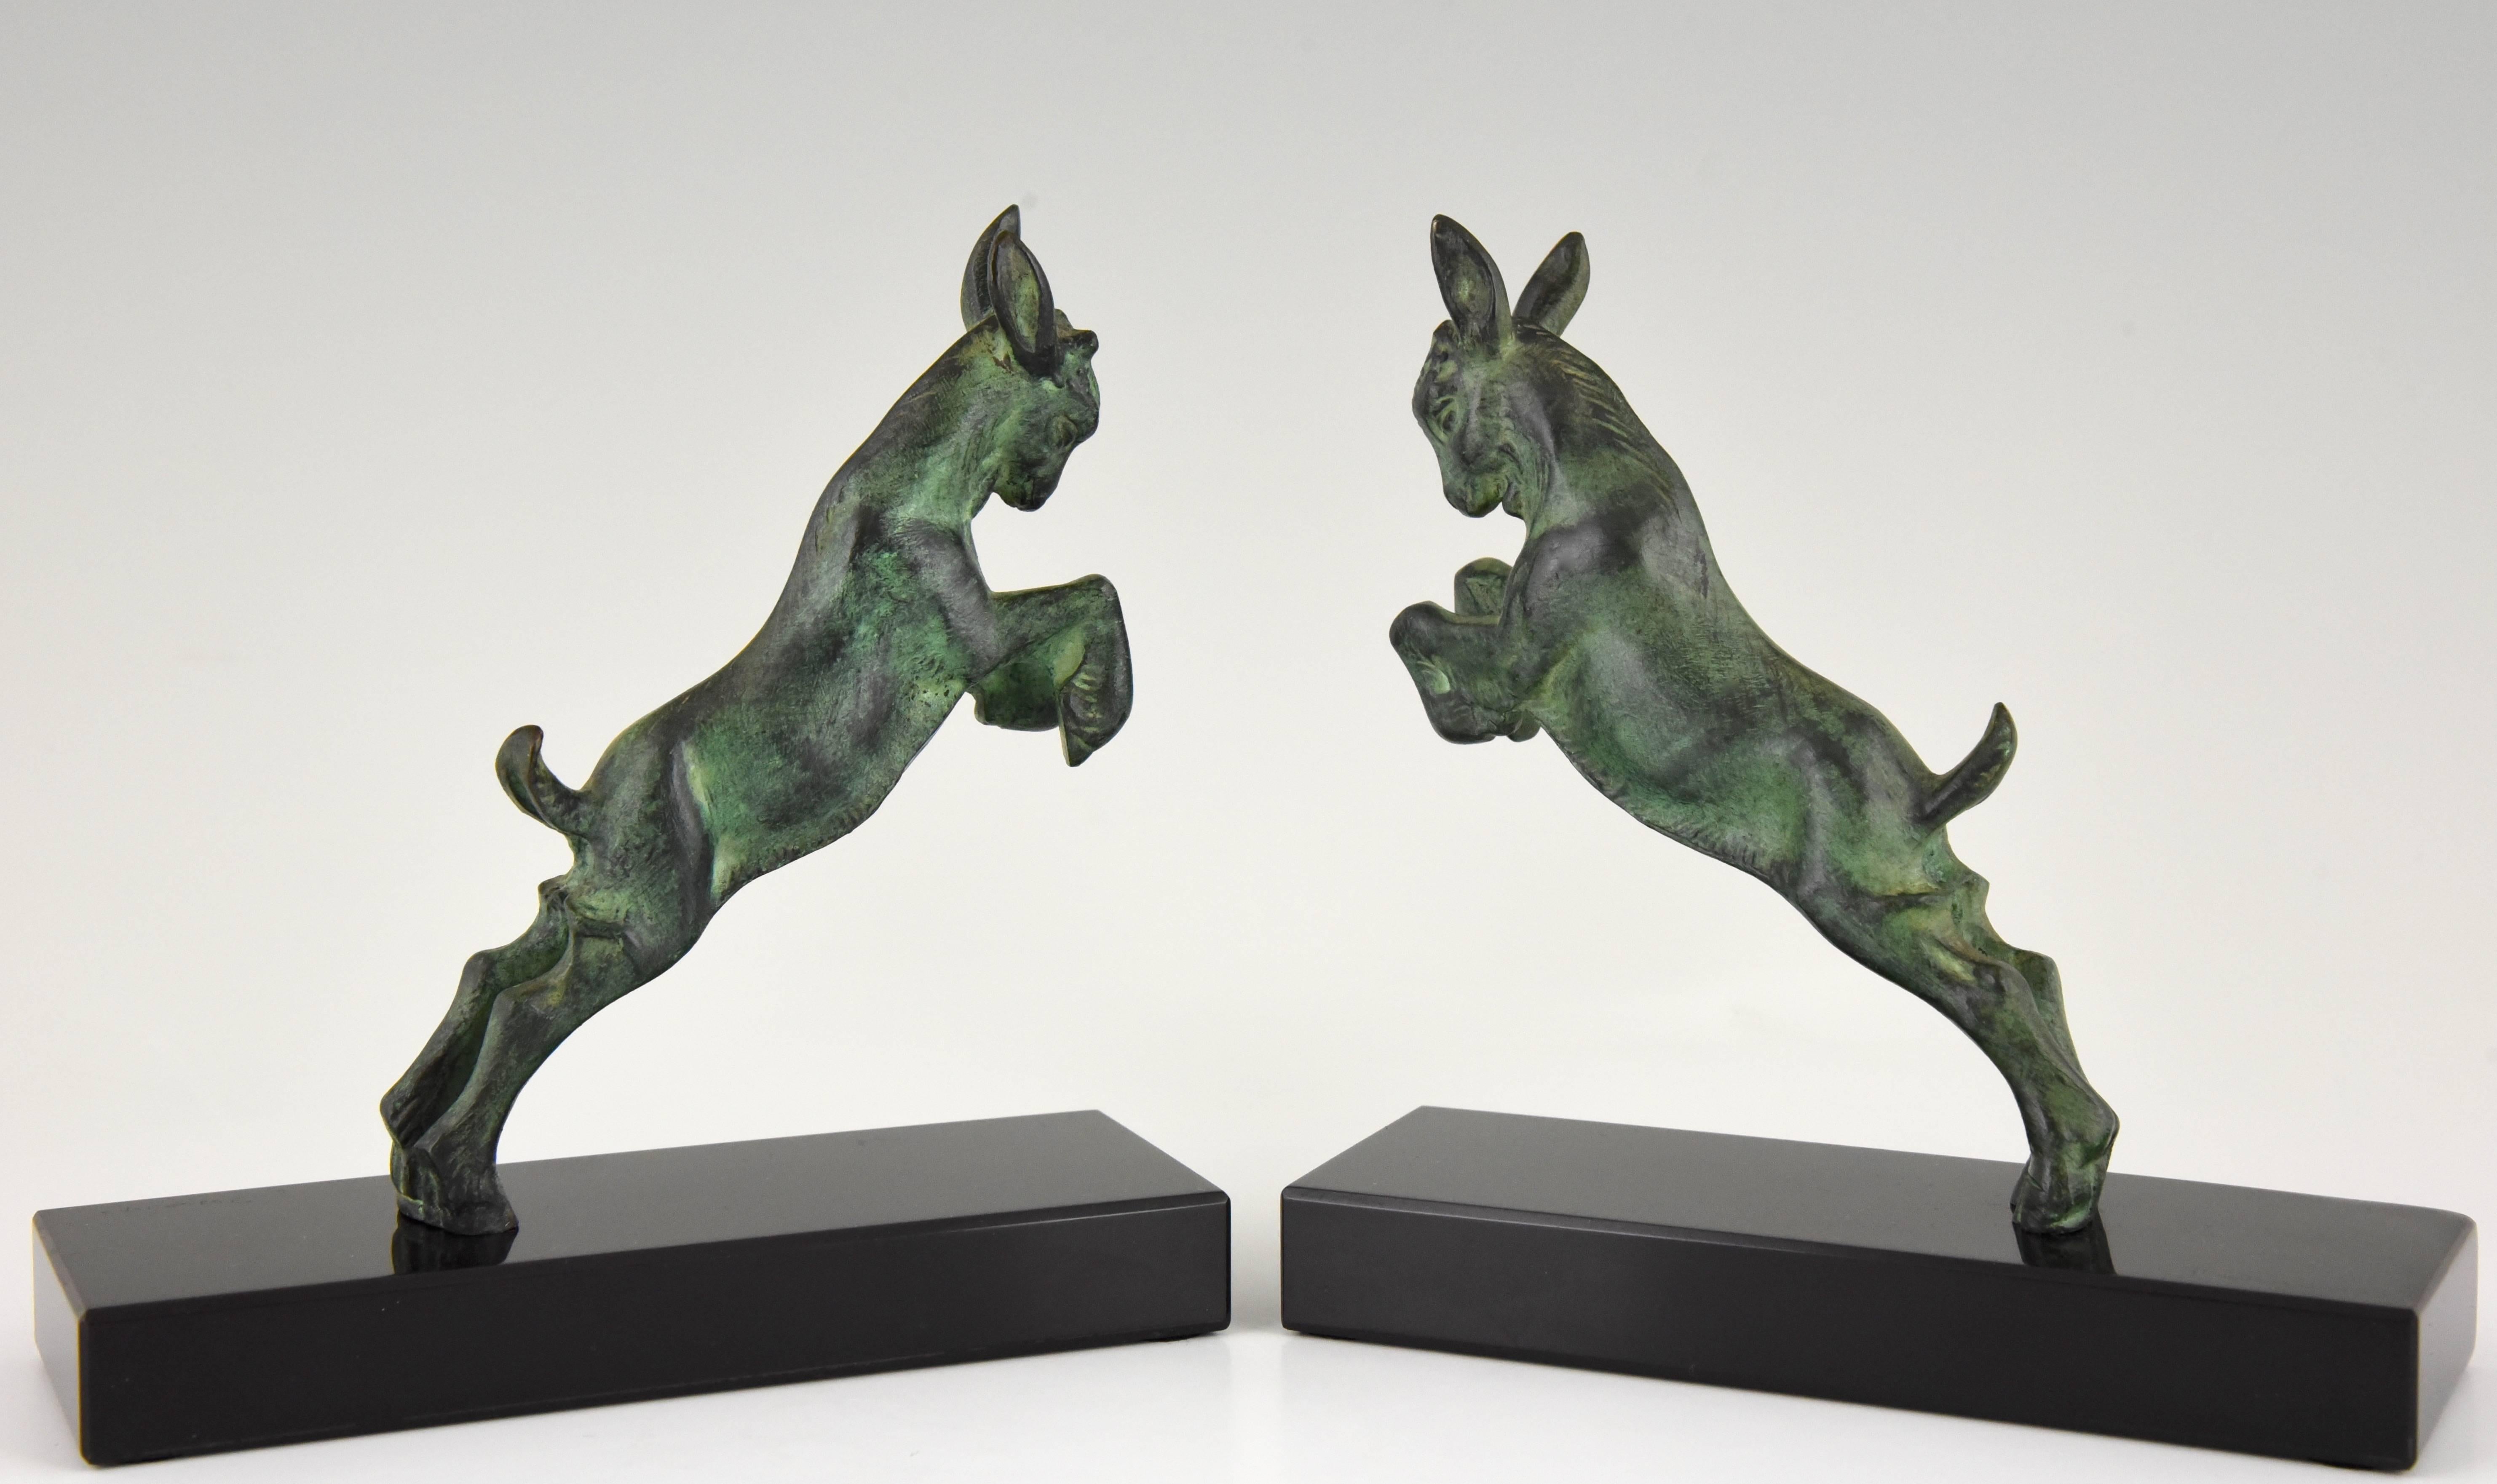 Lovely pair of green patinated bronze bookends with jumping goats by the french artist Joe Descomps  

Signature/ Marks: J. Descomps.  
Style: Art Deco
Date: 1930
Material: Bronze on a marble base.
Origin: France
Size: H. 15.5 cm x L. 15 cm. x W.